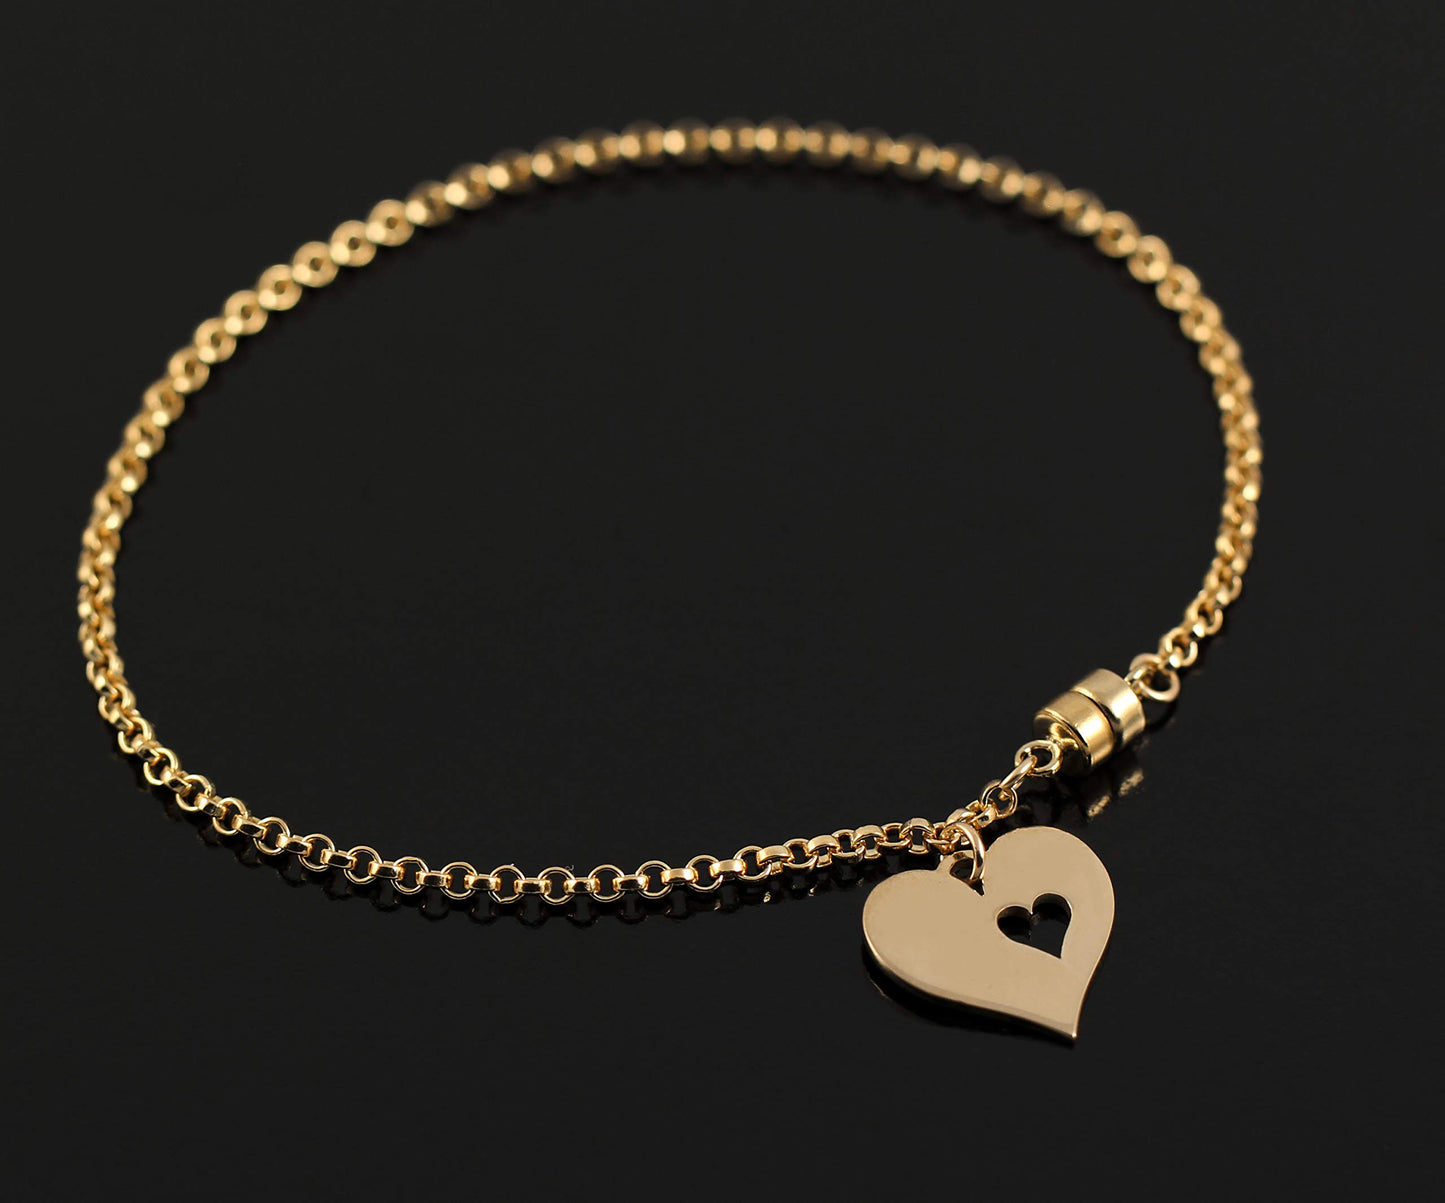 Great Grandma Jewelry • Great Grandmother Gifts • 14k Gold Bracelet • Gold Heart with Heart Cutout Charm • Magnetic Clasp • Grandparents Gifts from Grandchild • Gift for Grandma from Grandchildren